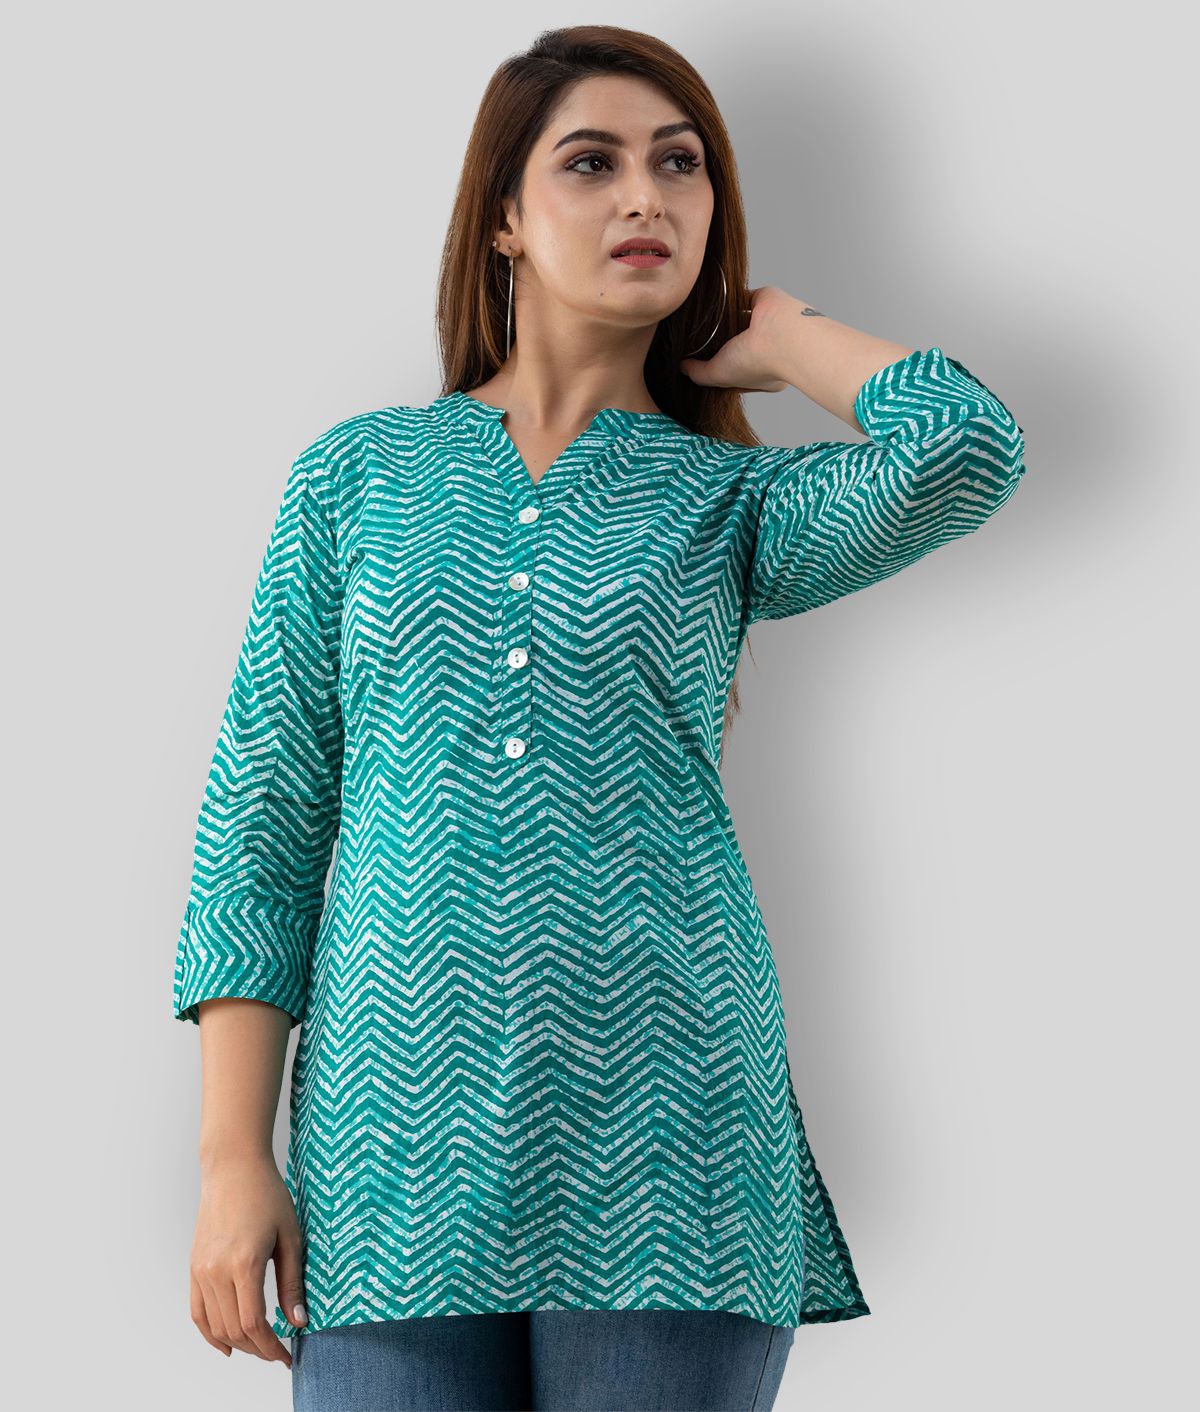     			SVARCHI - Turquoise Cotton Blend Women's Tunic ( Pack of 1 )